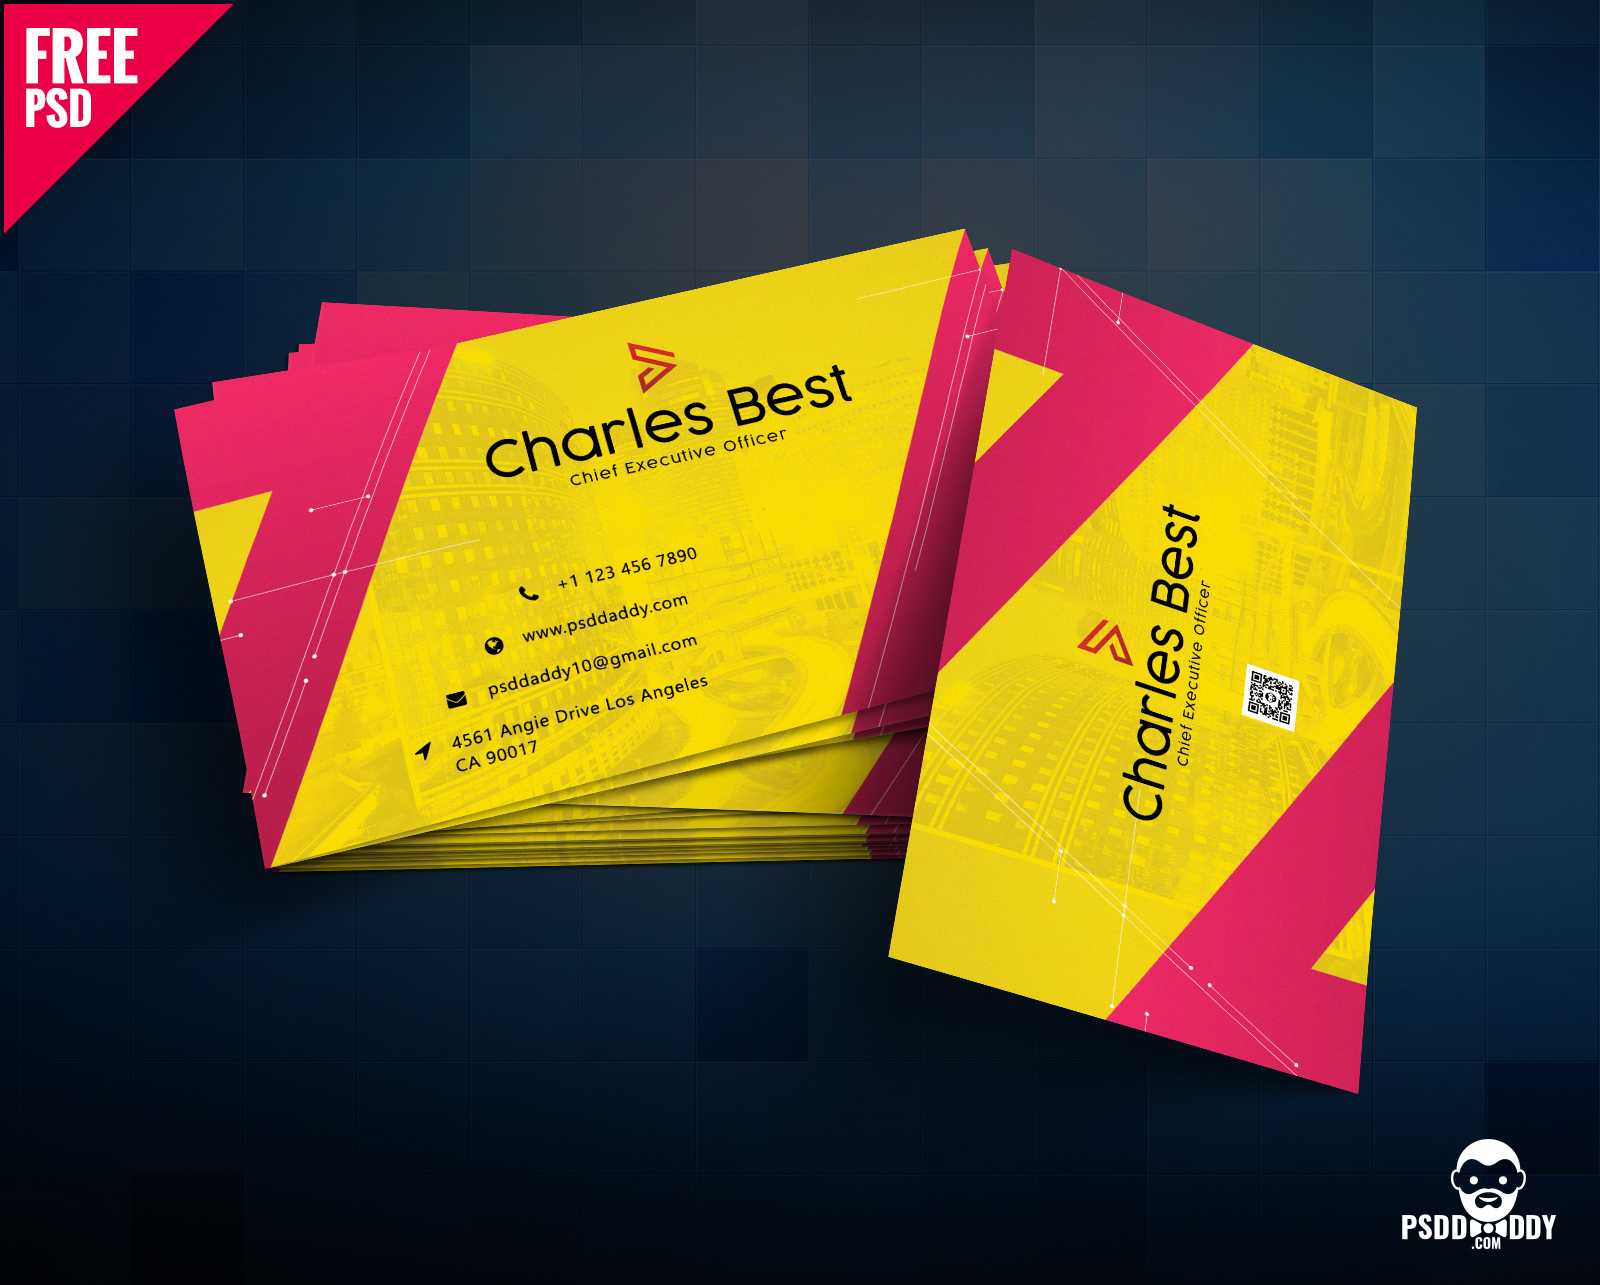 Download] Creative Business Card Free Psd | Psddaddy Throughout Business Card Template Photoshop Cs6